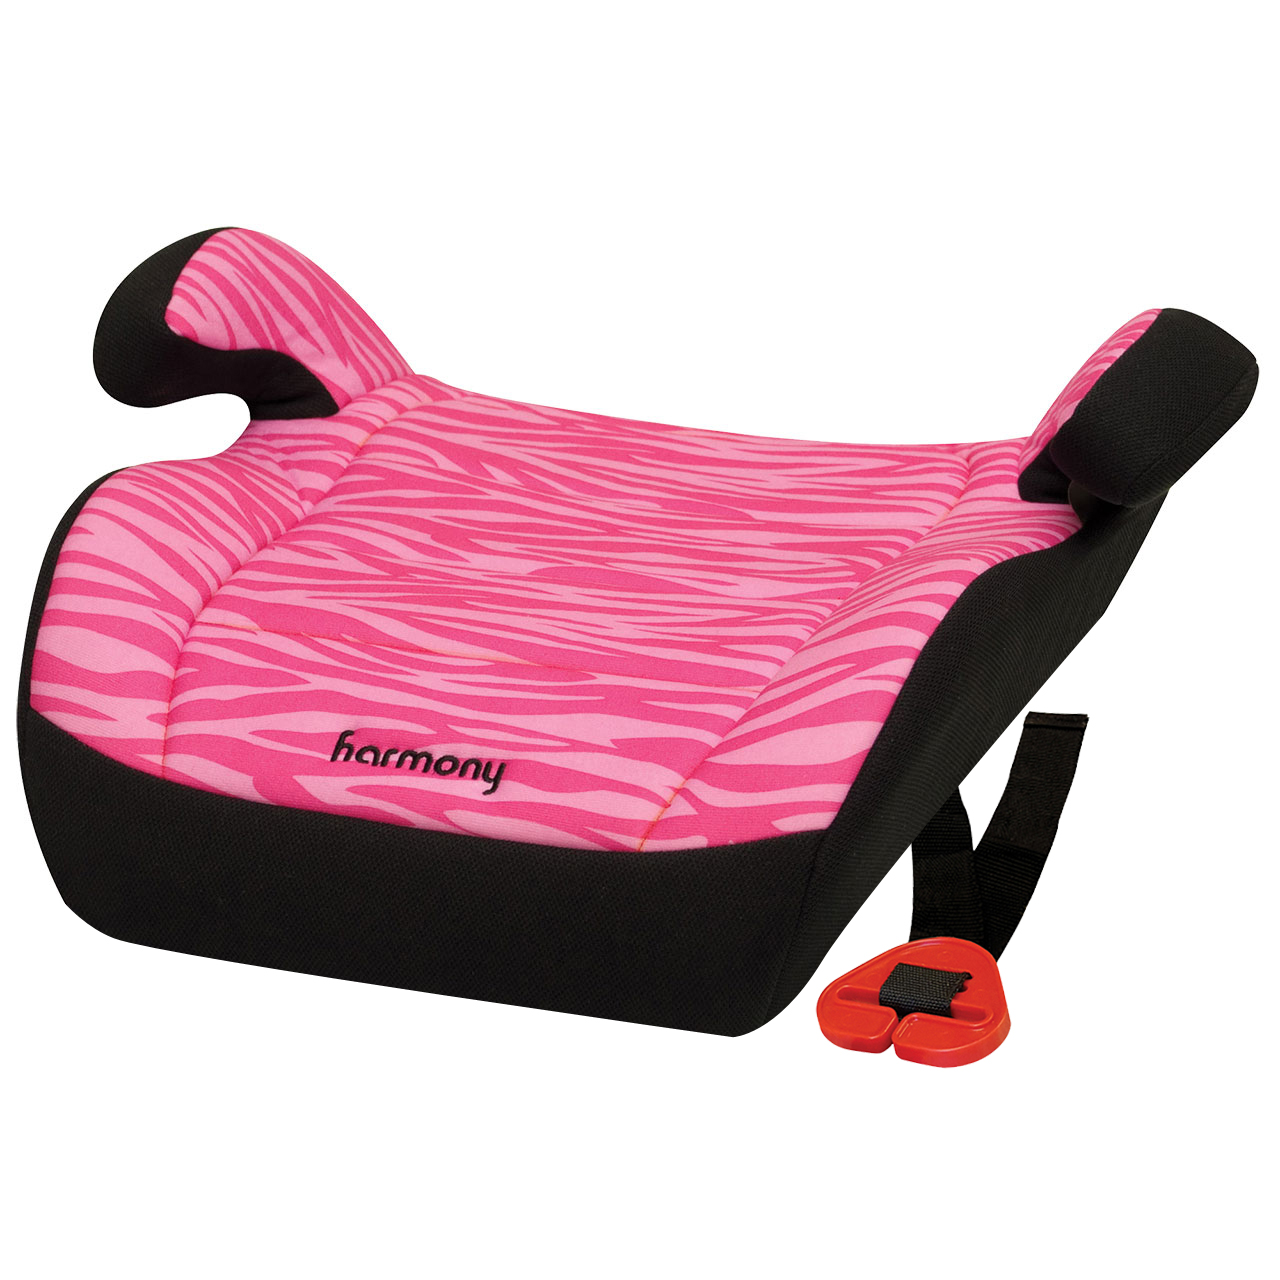 Harmony Juvenile Youth Backless Booster Car Seat, Pink Zebra - image 1 of 7